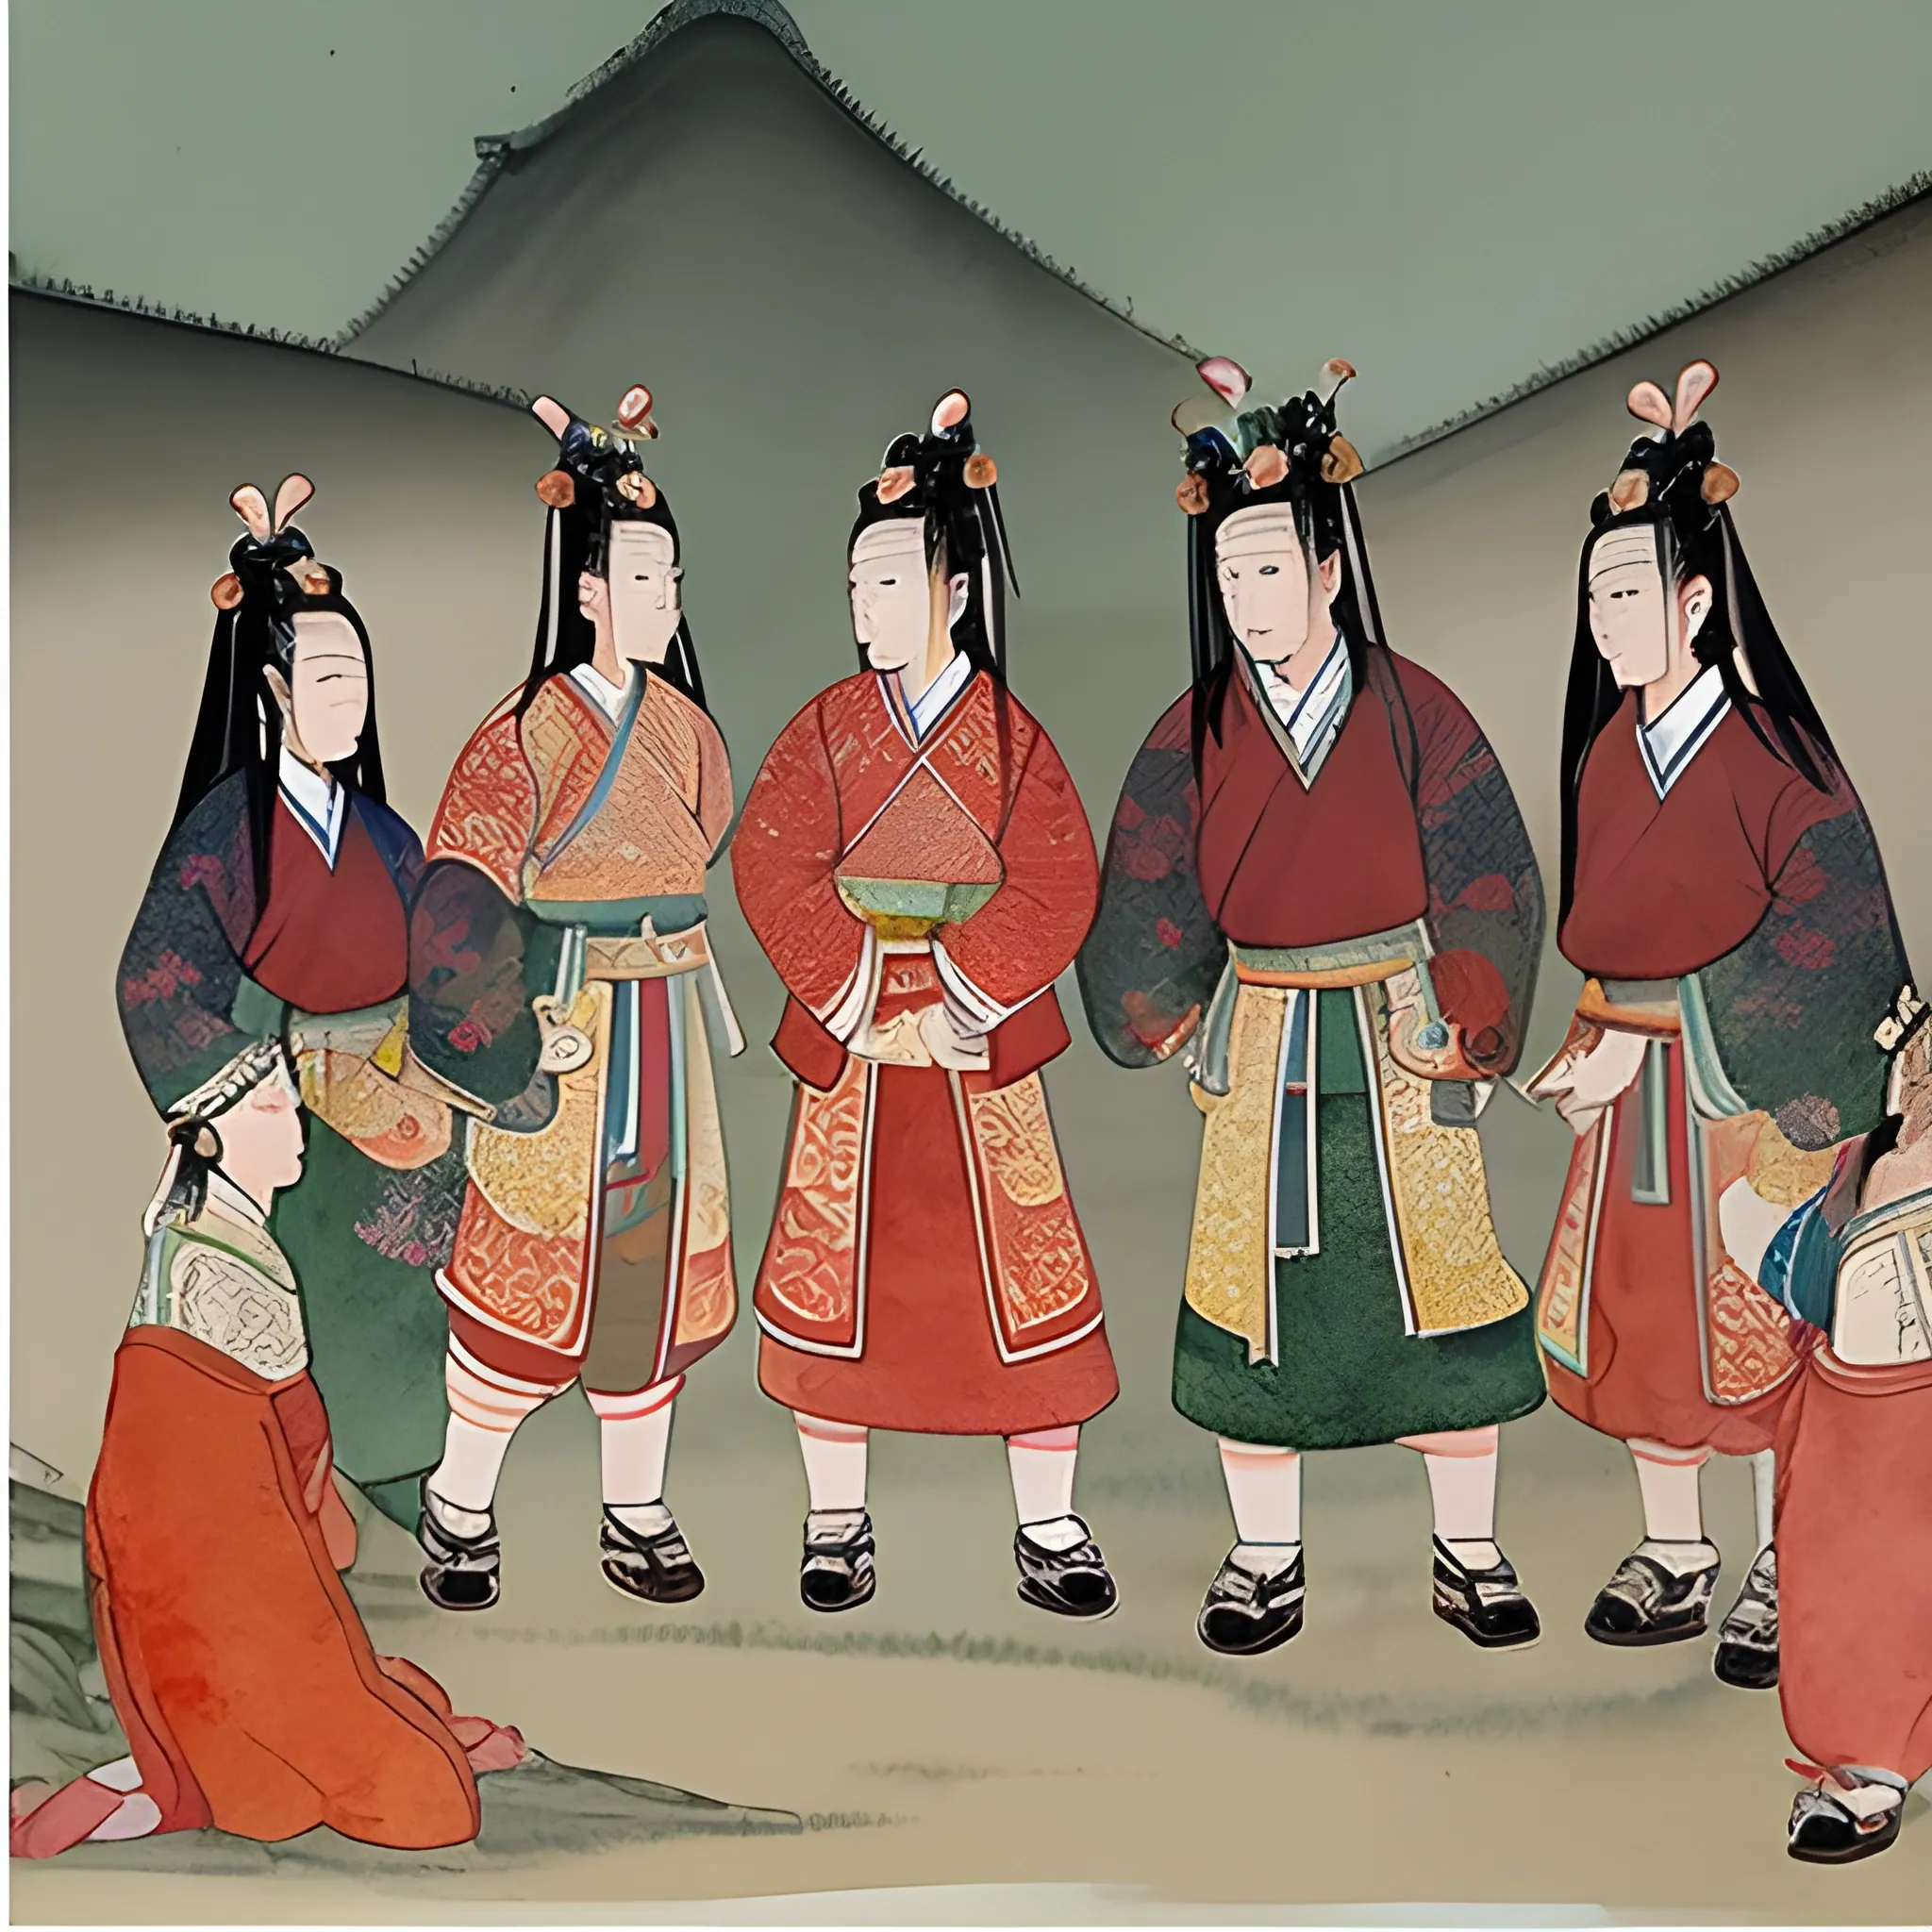 During the Northern Song Dynasty in China, the Jin people forcibly abducted the royal family of the Song Dynasty and sexually insulted them
, Water Color